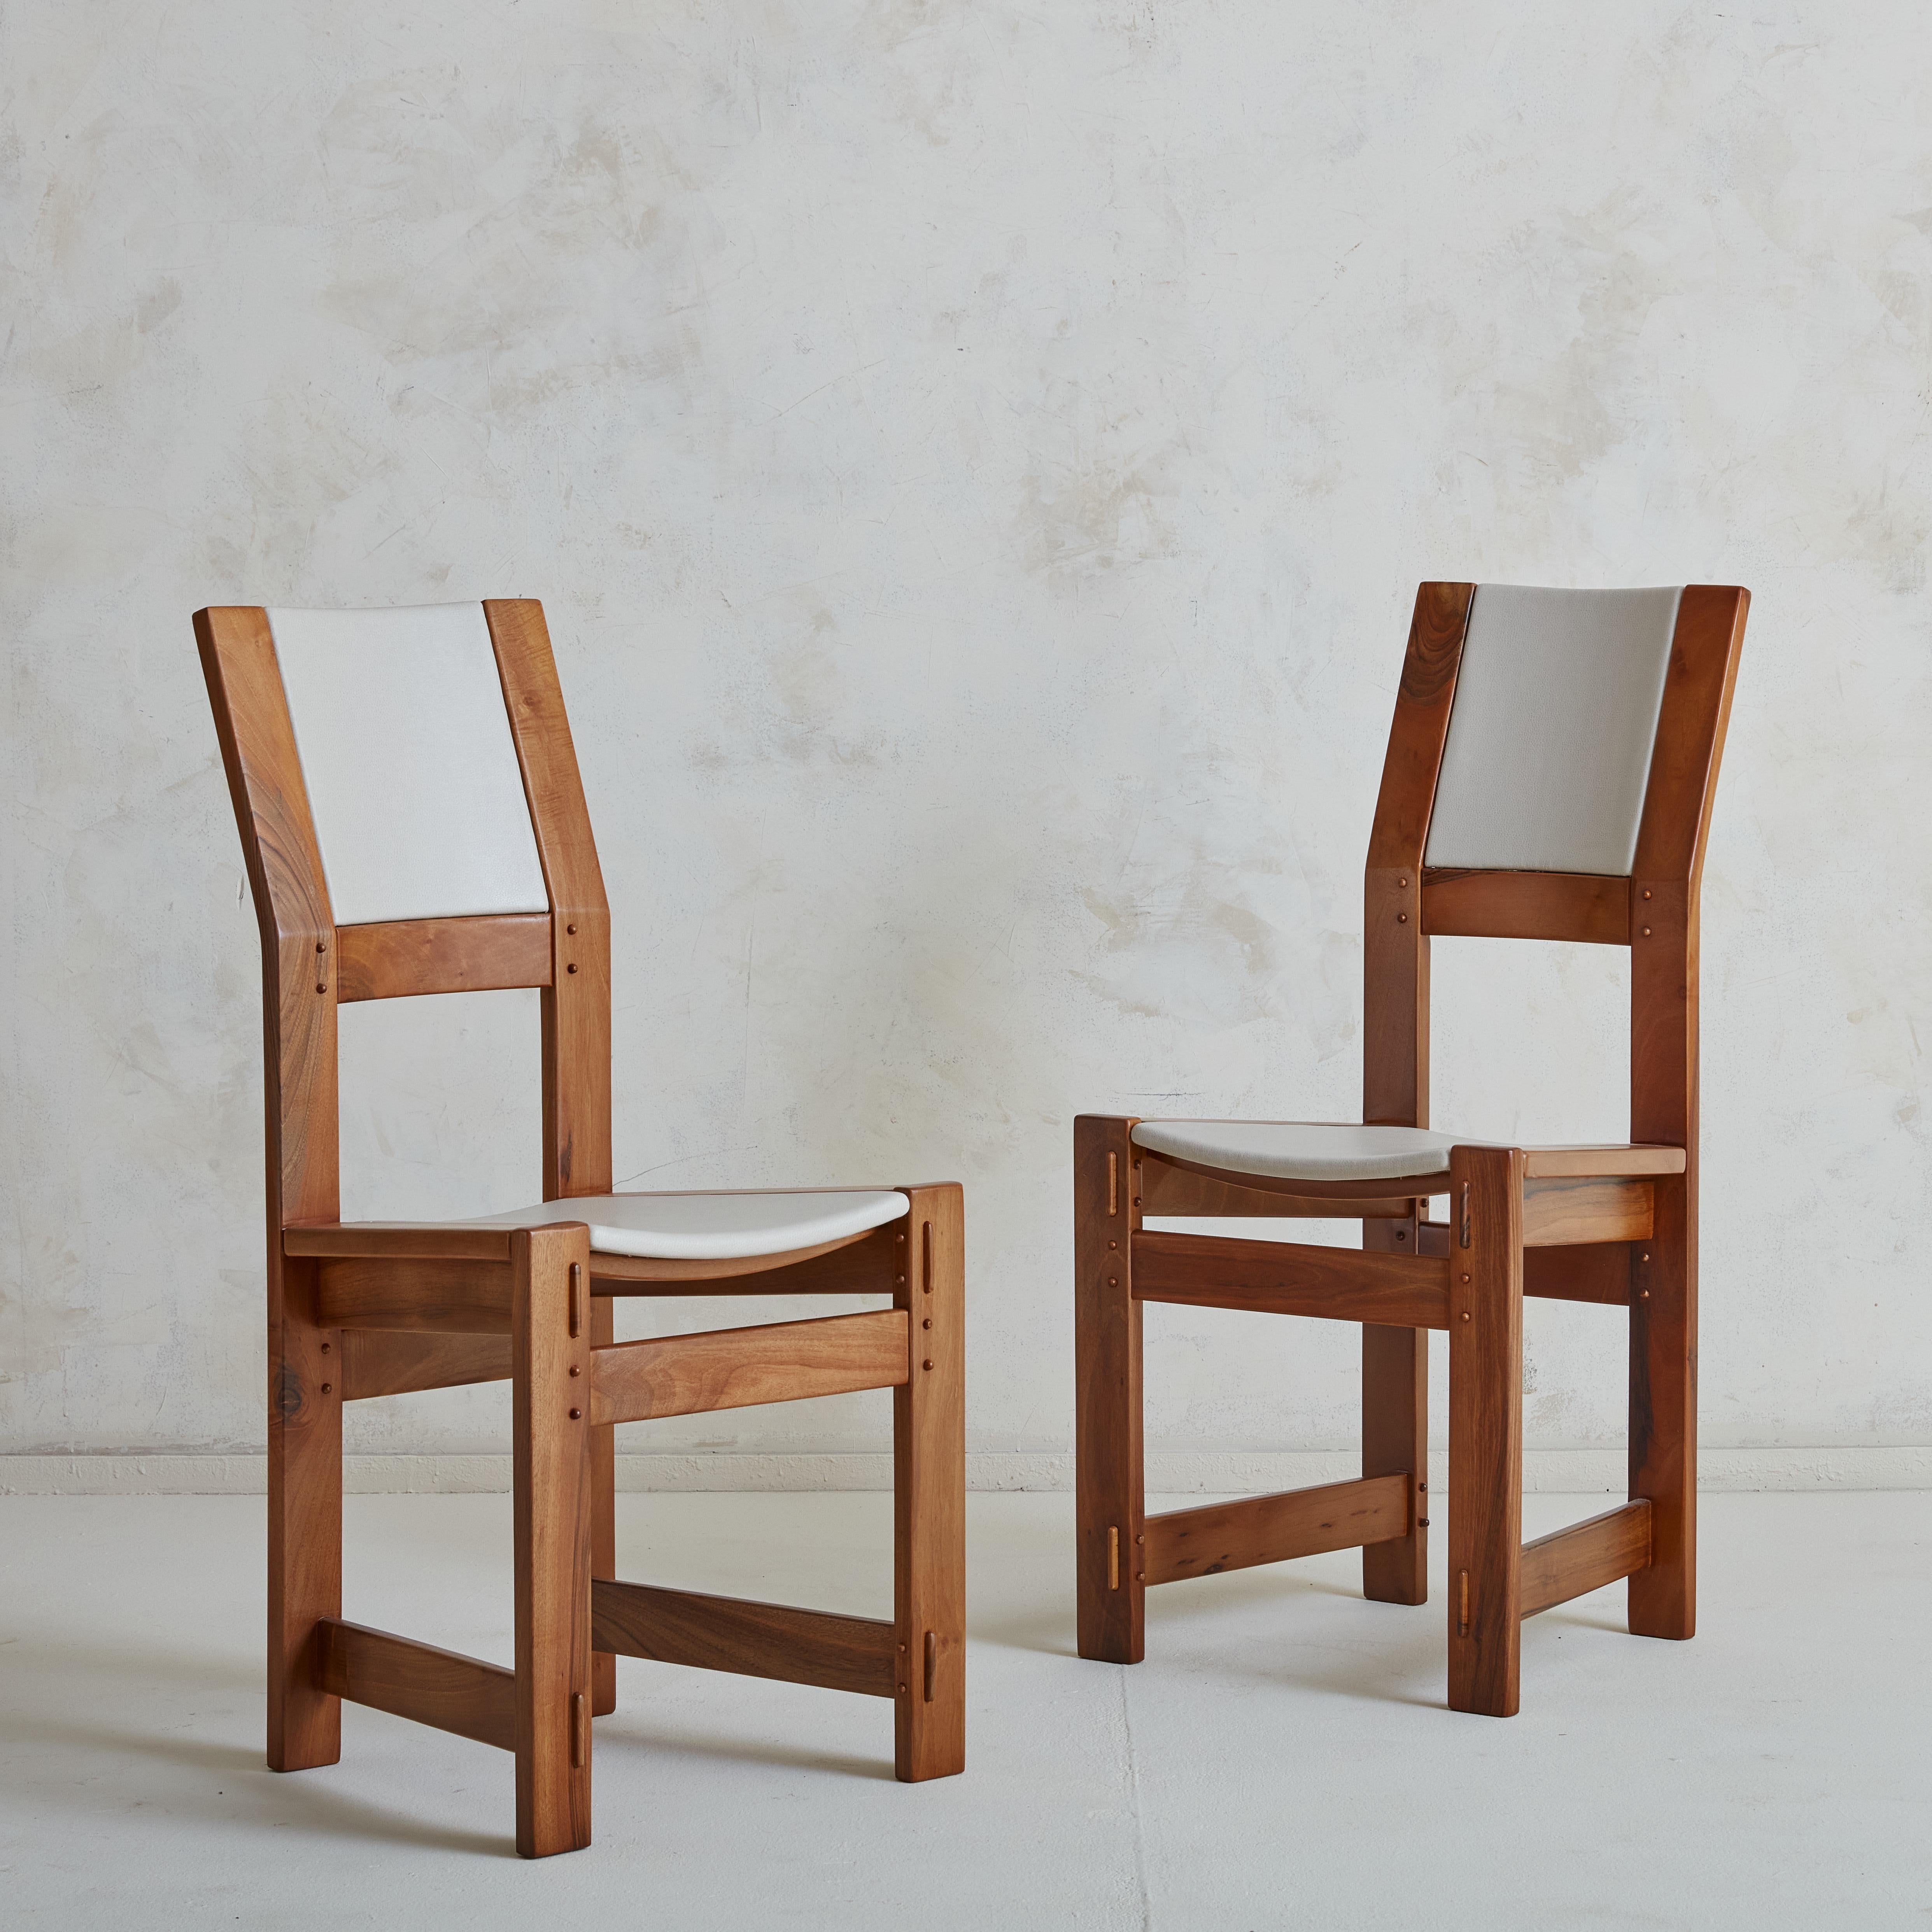 A gorgeous set of 4 dining chairs by sculptor and designer Giuseppe Rivadossi for Officina Rivadossi. The sculptural yet minimal oak frame is slightly tiled, creating a very functional and comfortable seating position. We have restored these in a